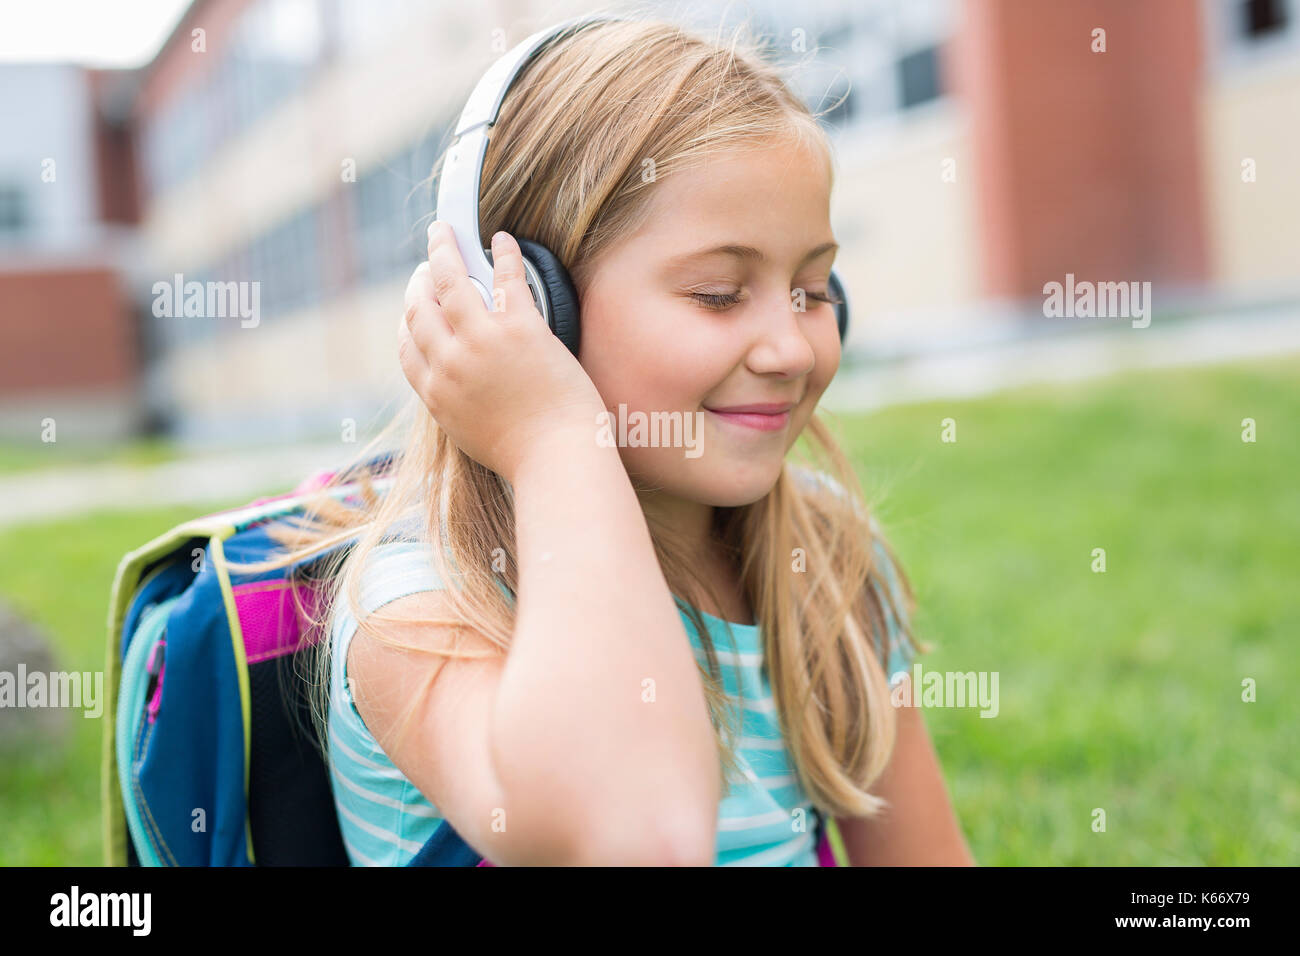 nine years old girl student at school Stock Photo